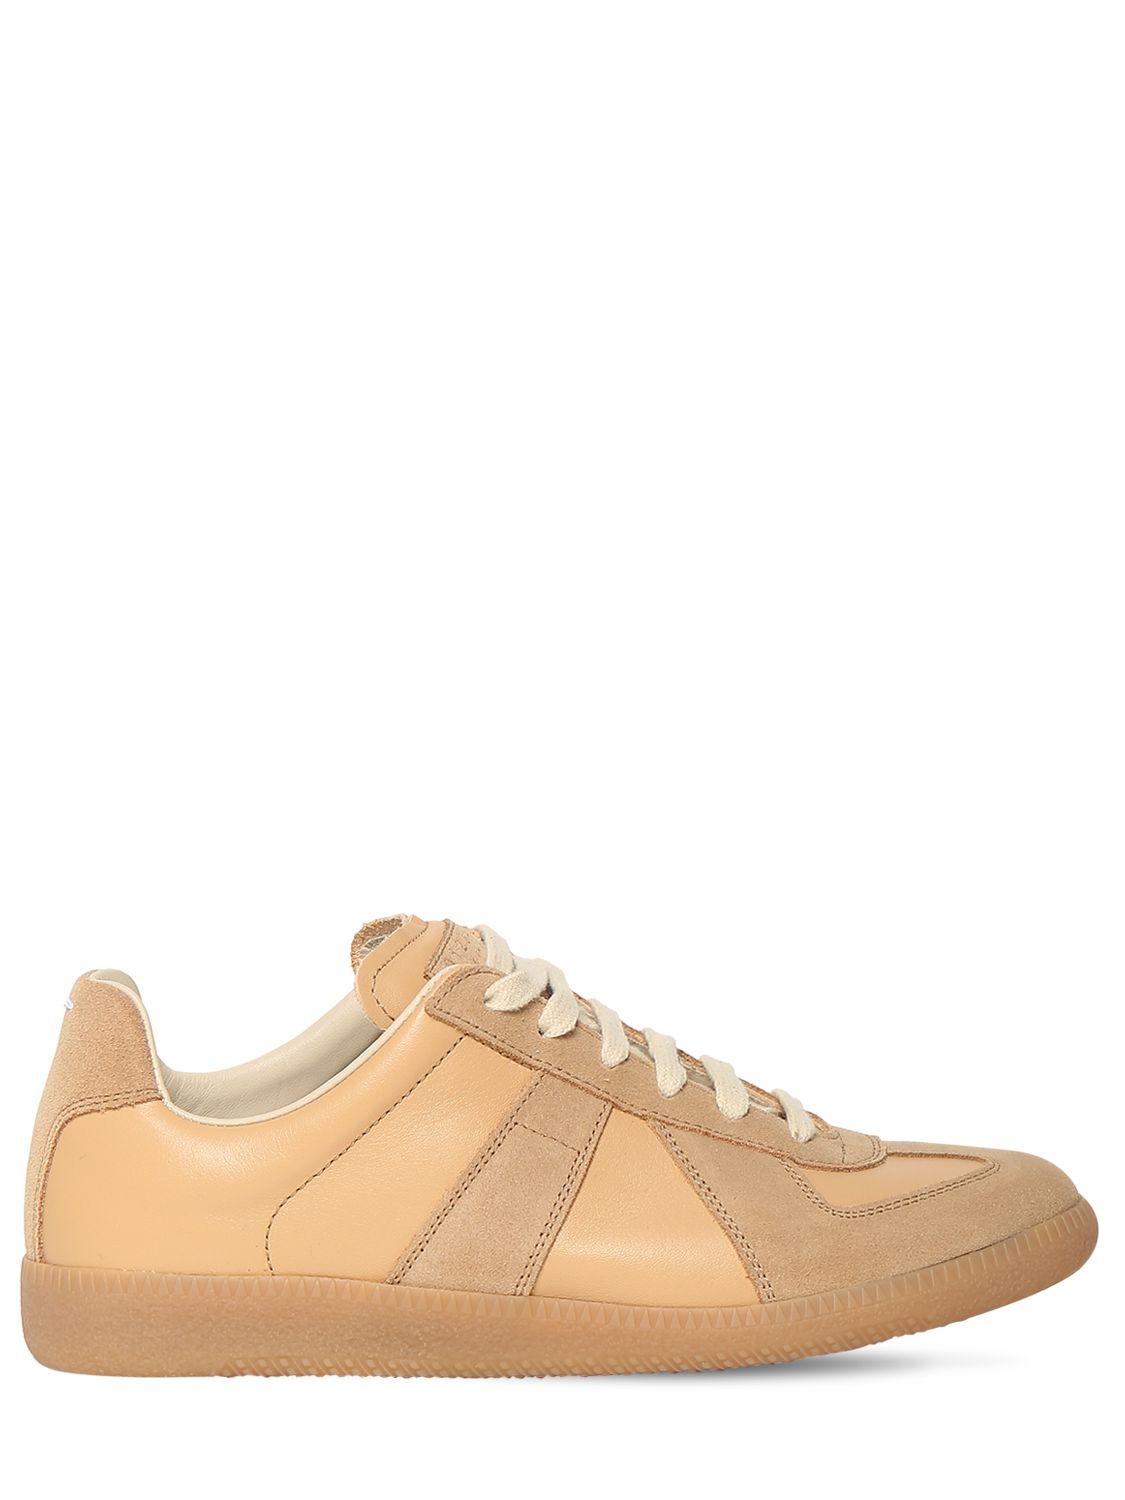 Shop Maison Margiela 20mm Replica Leather & Suede Sneakers In Camel